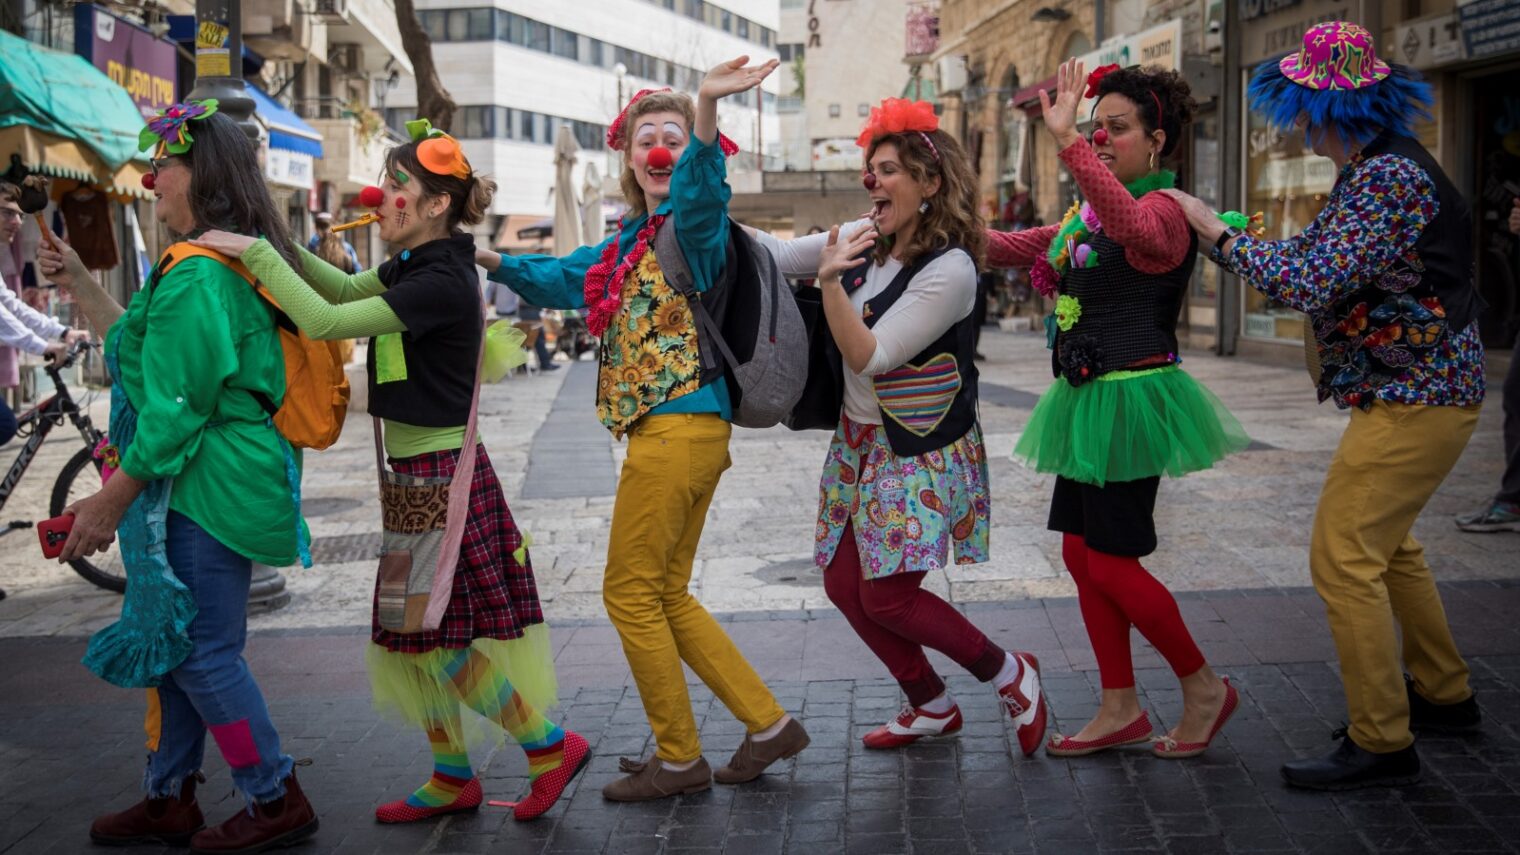 Get into party mode with these 10 Purim pics from Israel ISRAEL21c